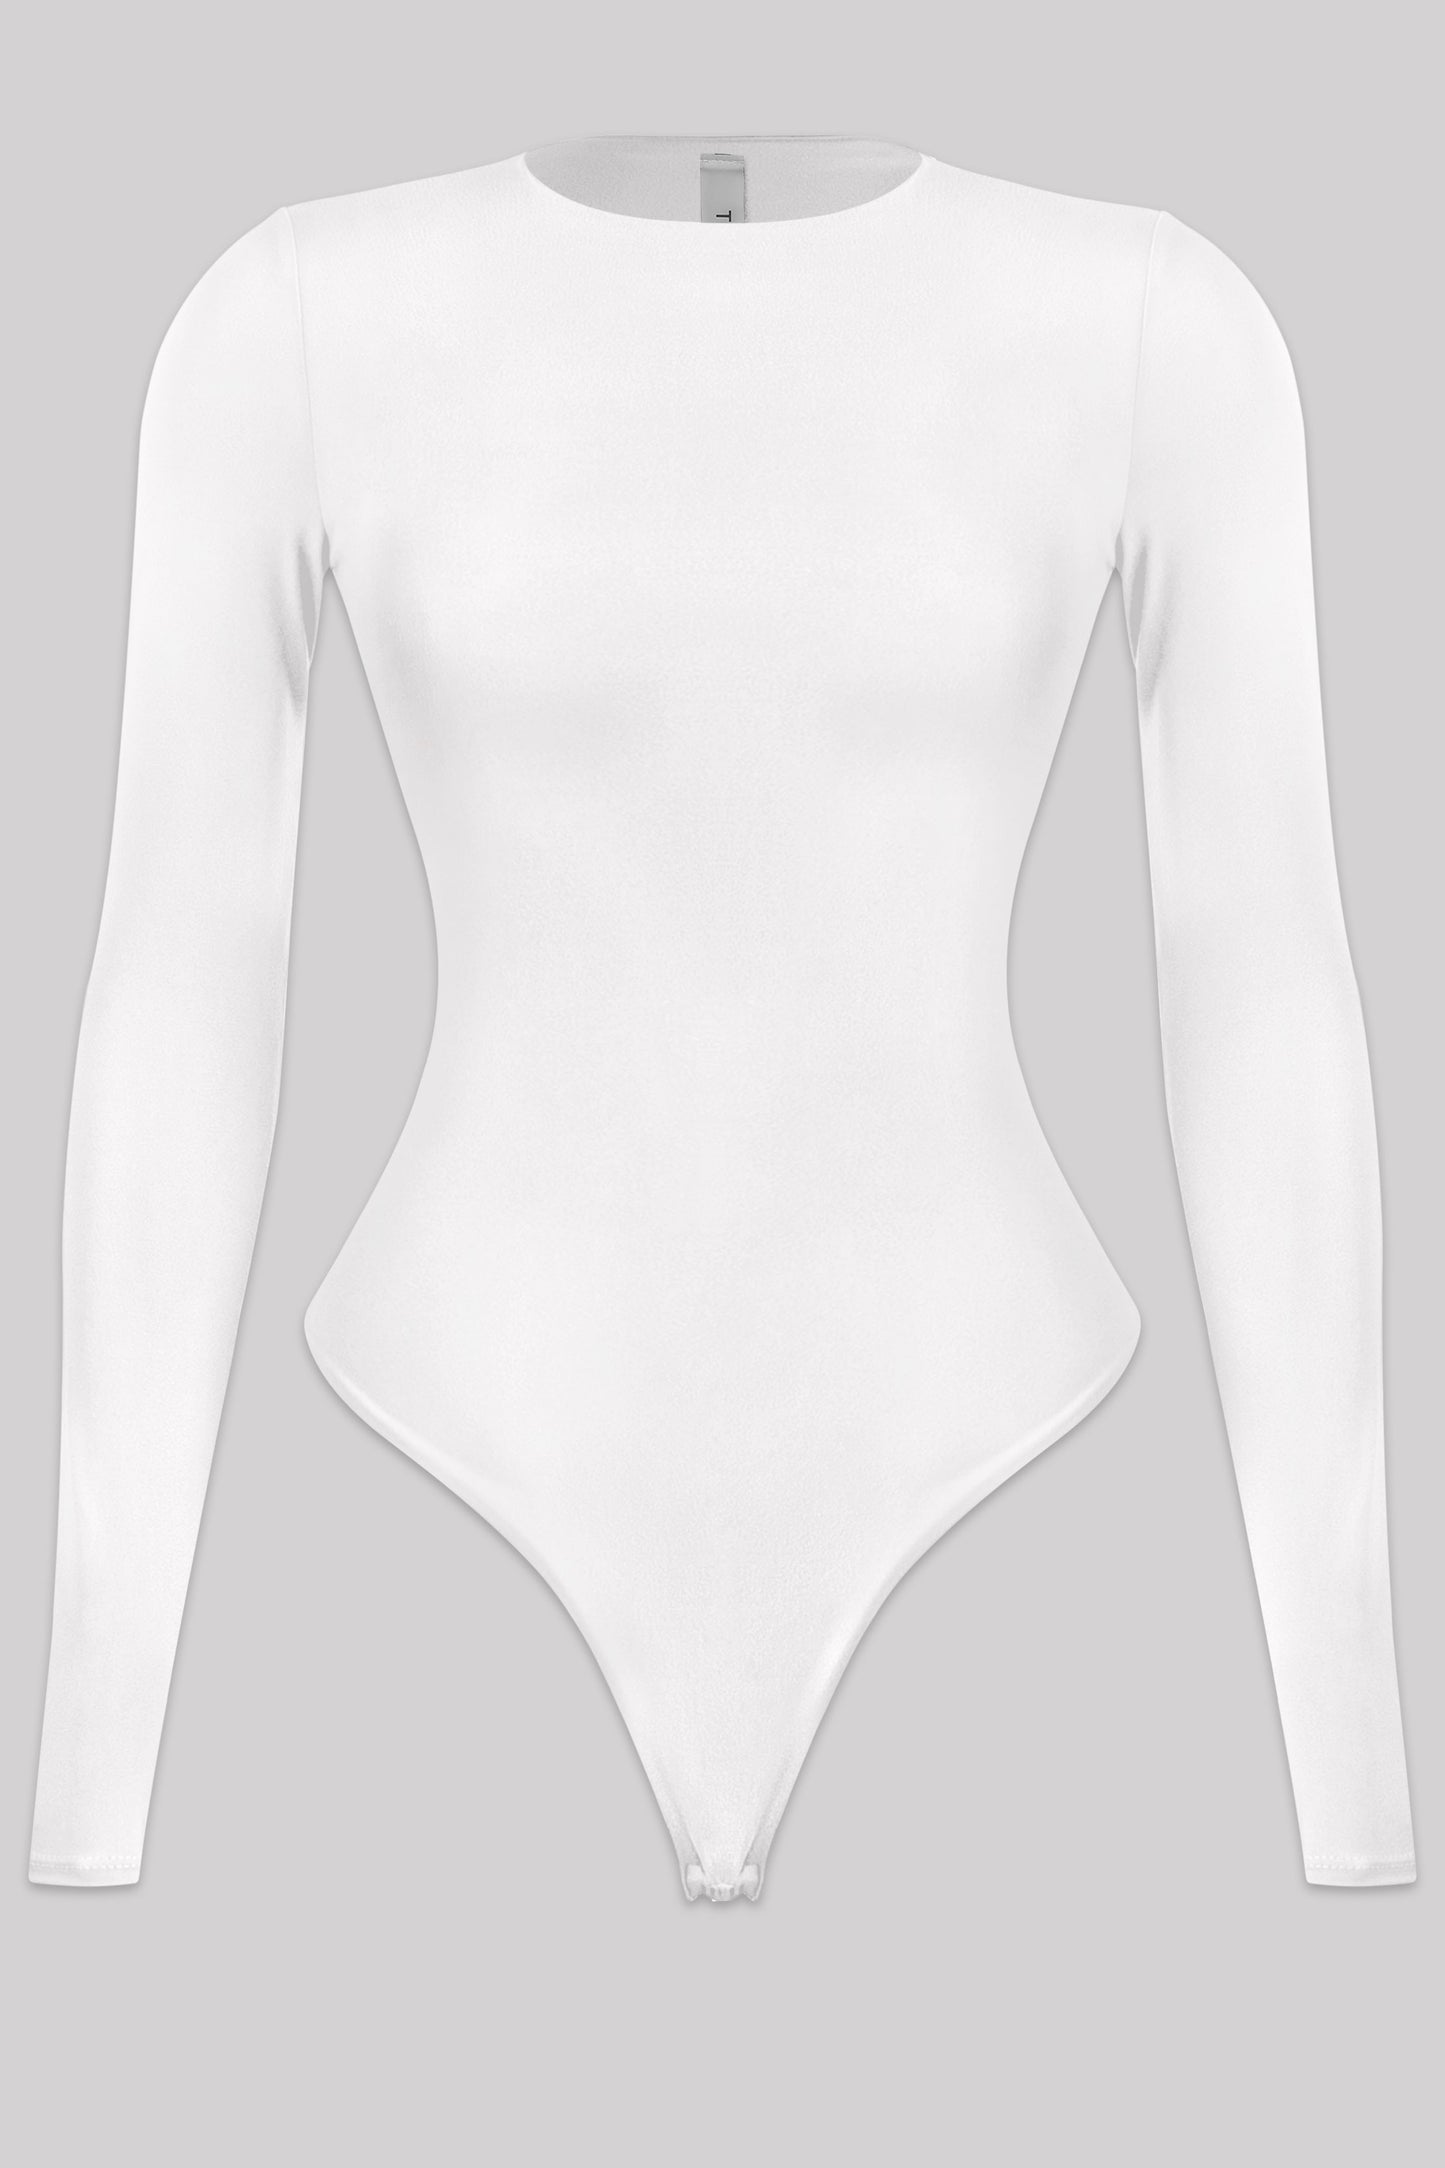 Skins double layered bodysuit